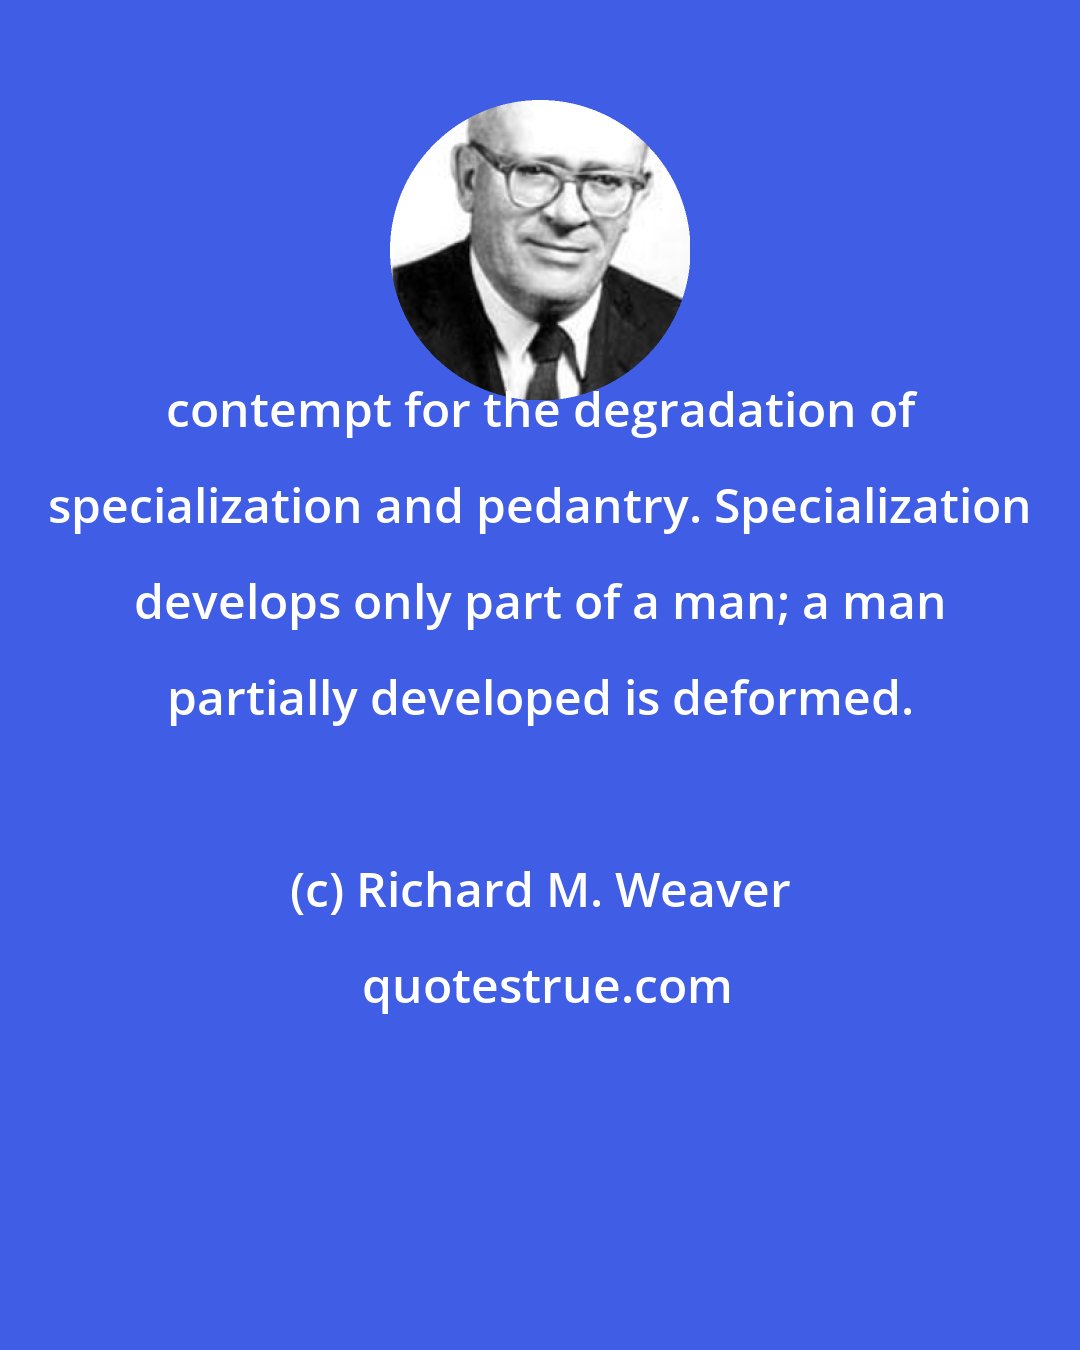 Richard M. Weaver: contempt for the degradation of specialization and pedantry. Specialization develops only part of a man; a man partially developed is deformed.